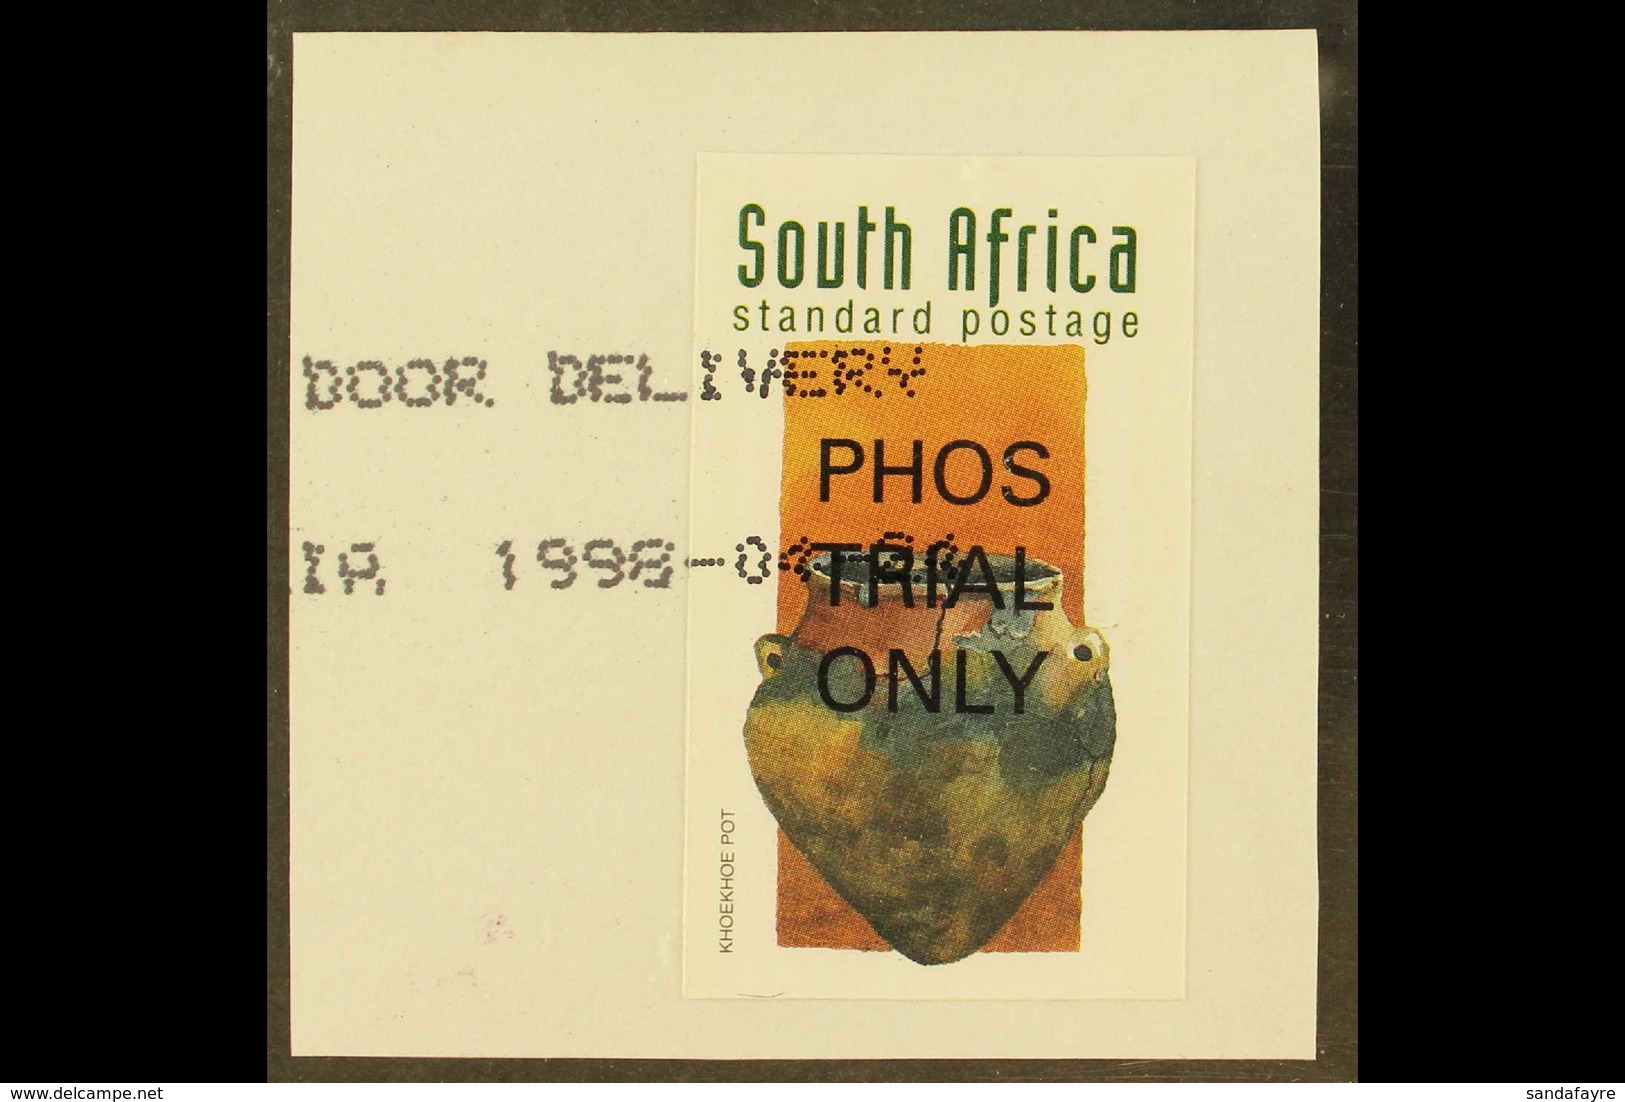 1998 Early South African History, Standard Postage (1r.10) Khoekhoe Pot, IMPERFORATE Single Overprinted "PHOS TRIAL ONLY - Non Classificati